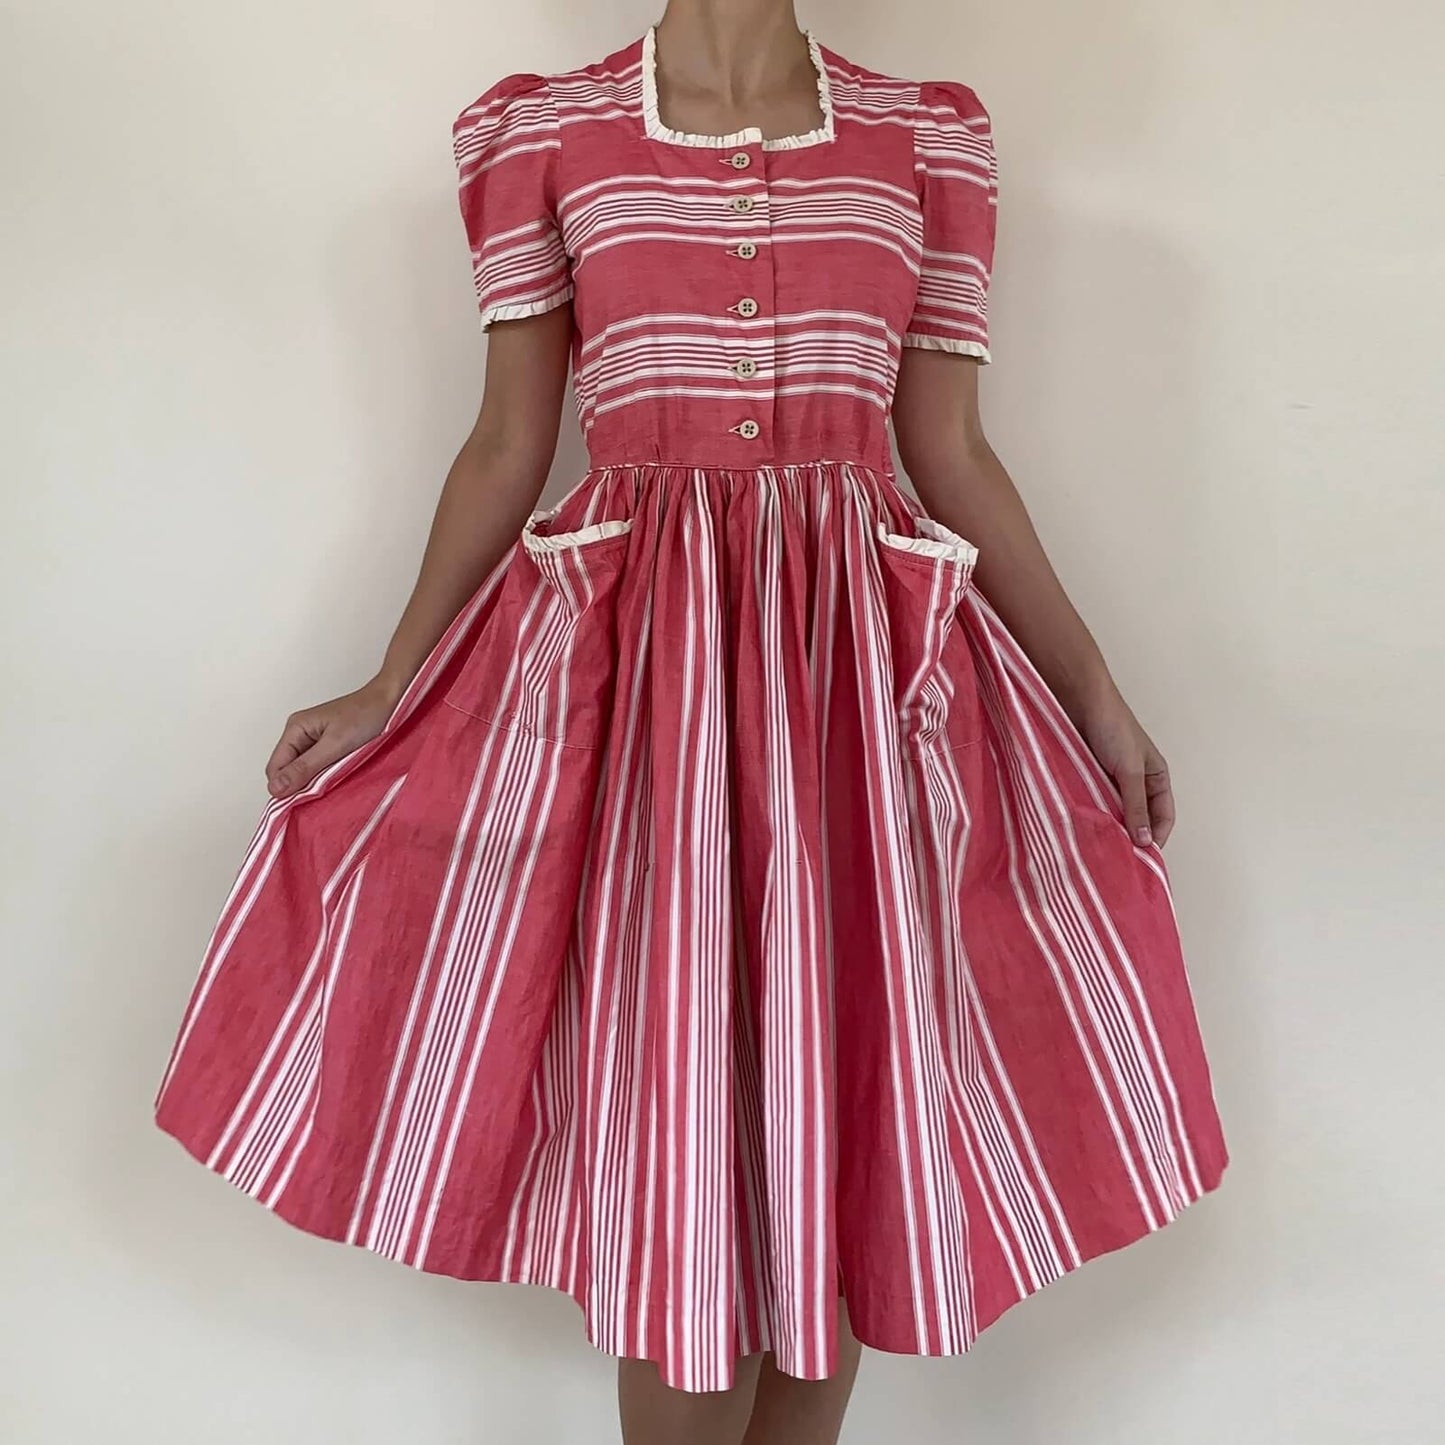 1950s pink and white striped cotton dress on a model